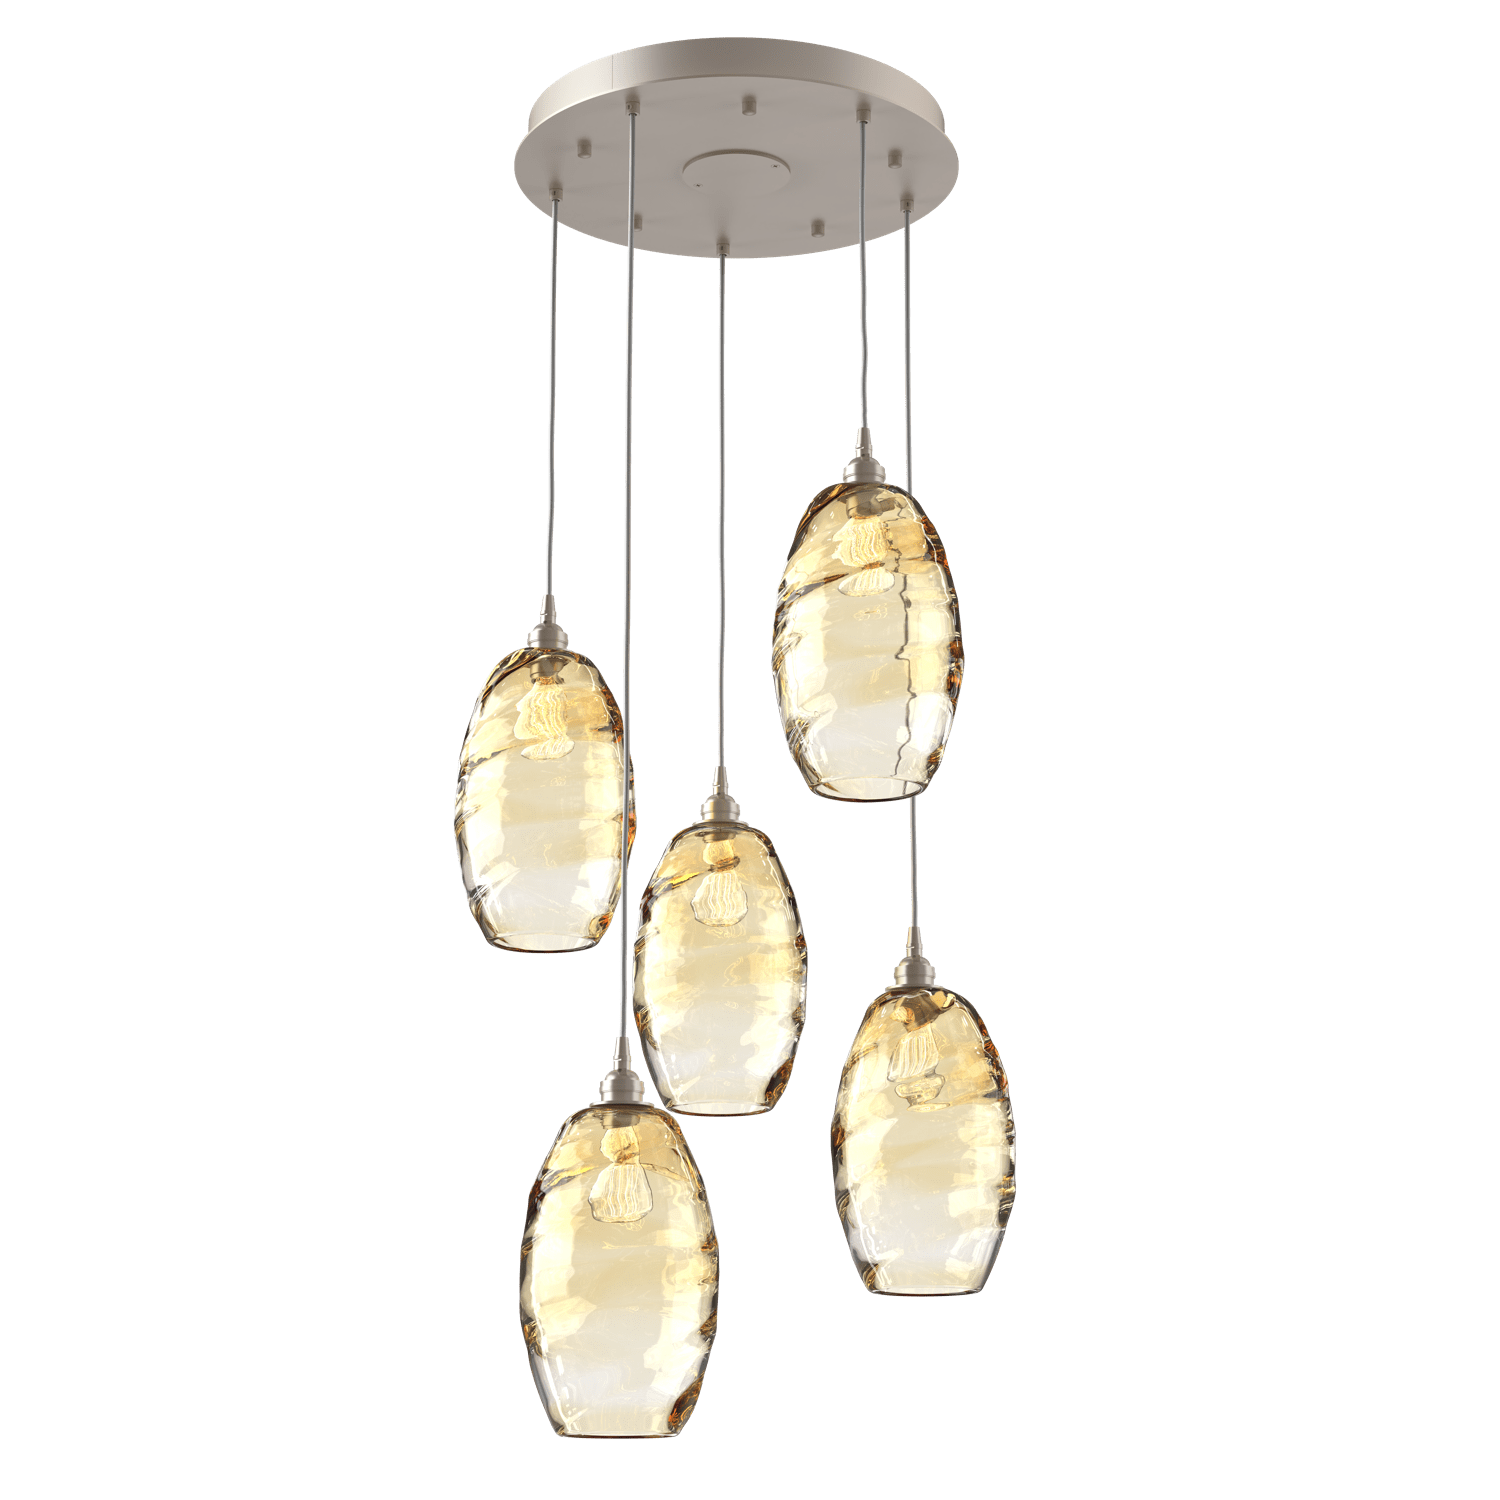 CHB0035-05-BS-OA-Hammerton-Studio-Optic-Blown-Glass-Elisse-5-light-round-pendant-chandelier-with-metallic-beige-silver-finish-and-optic-amber-blown-glass-shades-and-incandescent-lamping